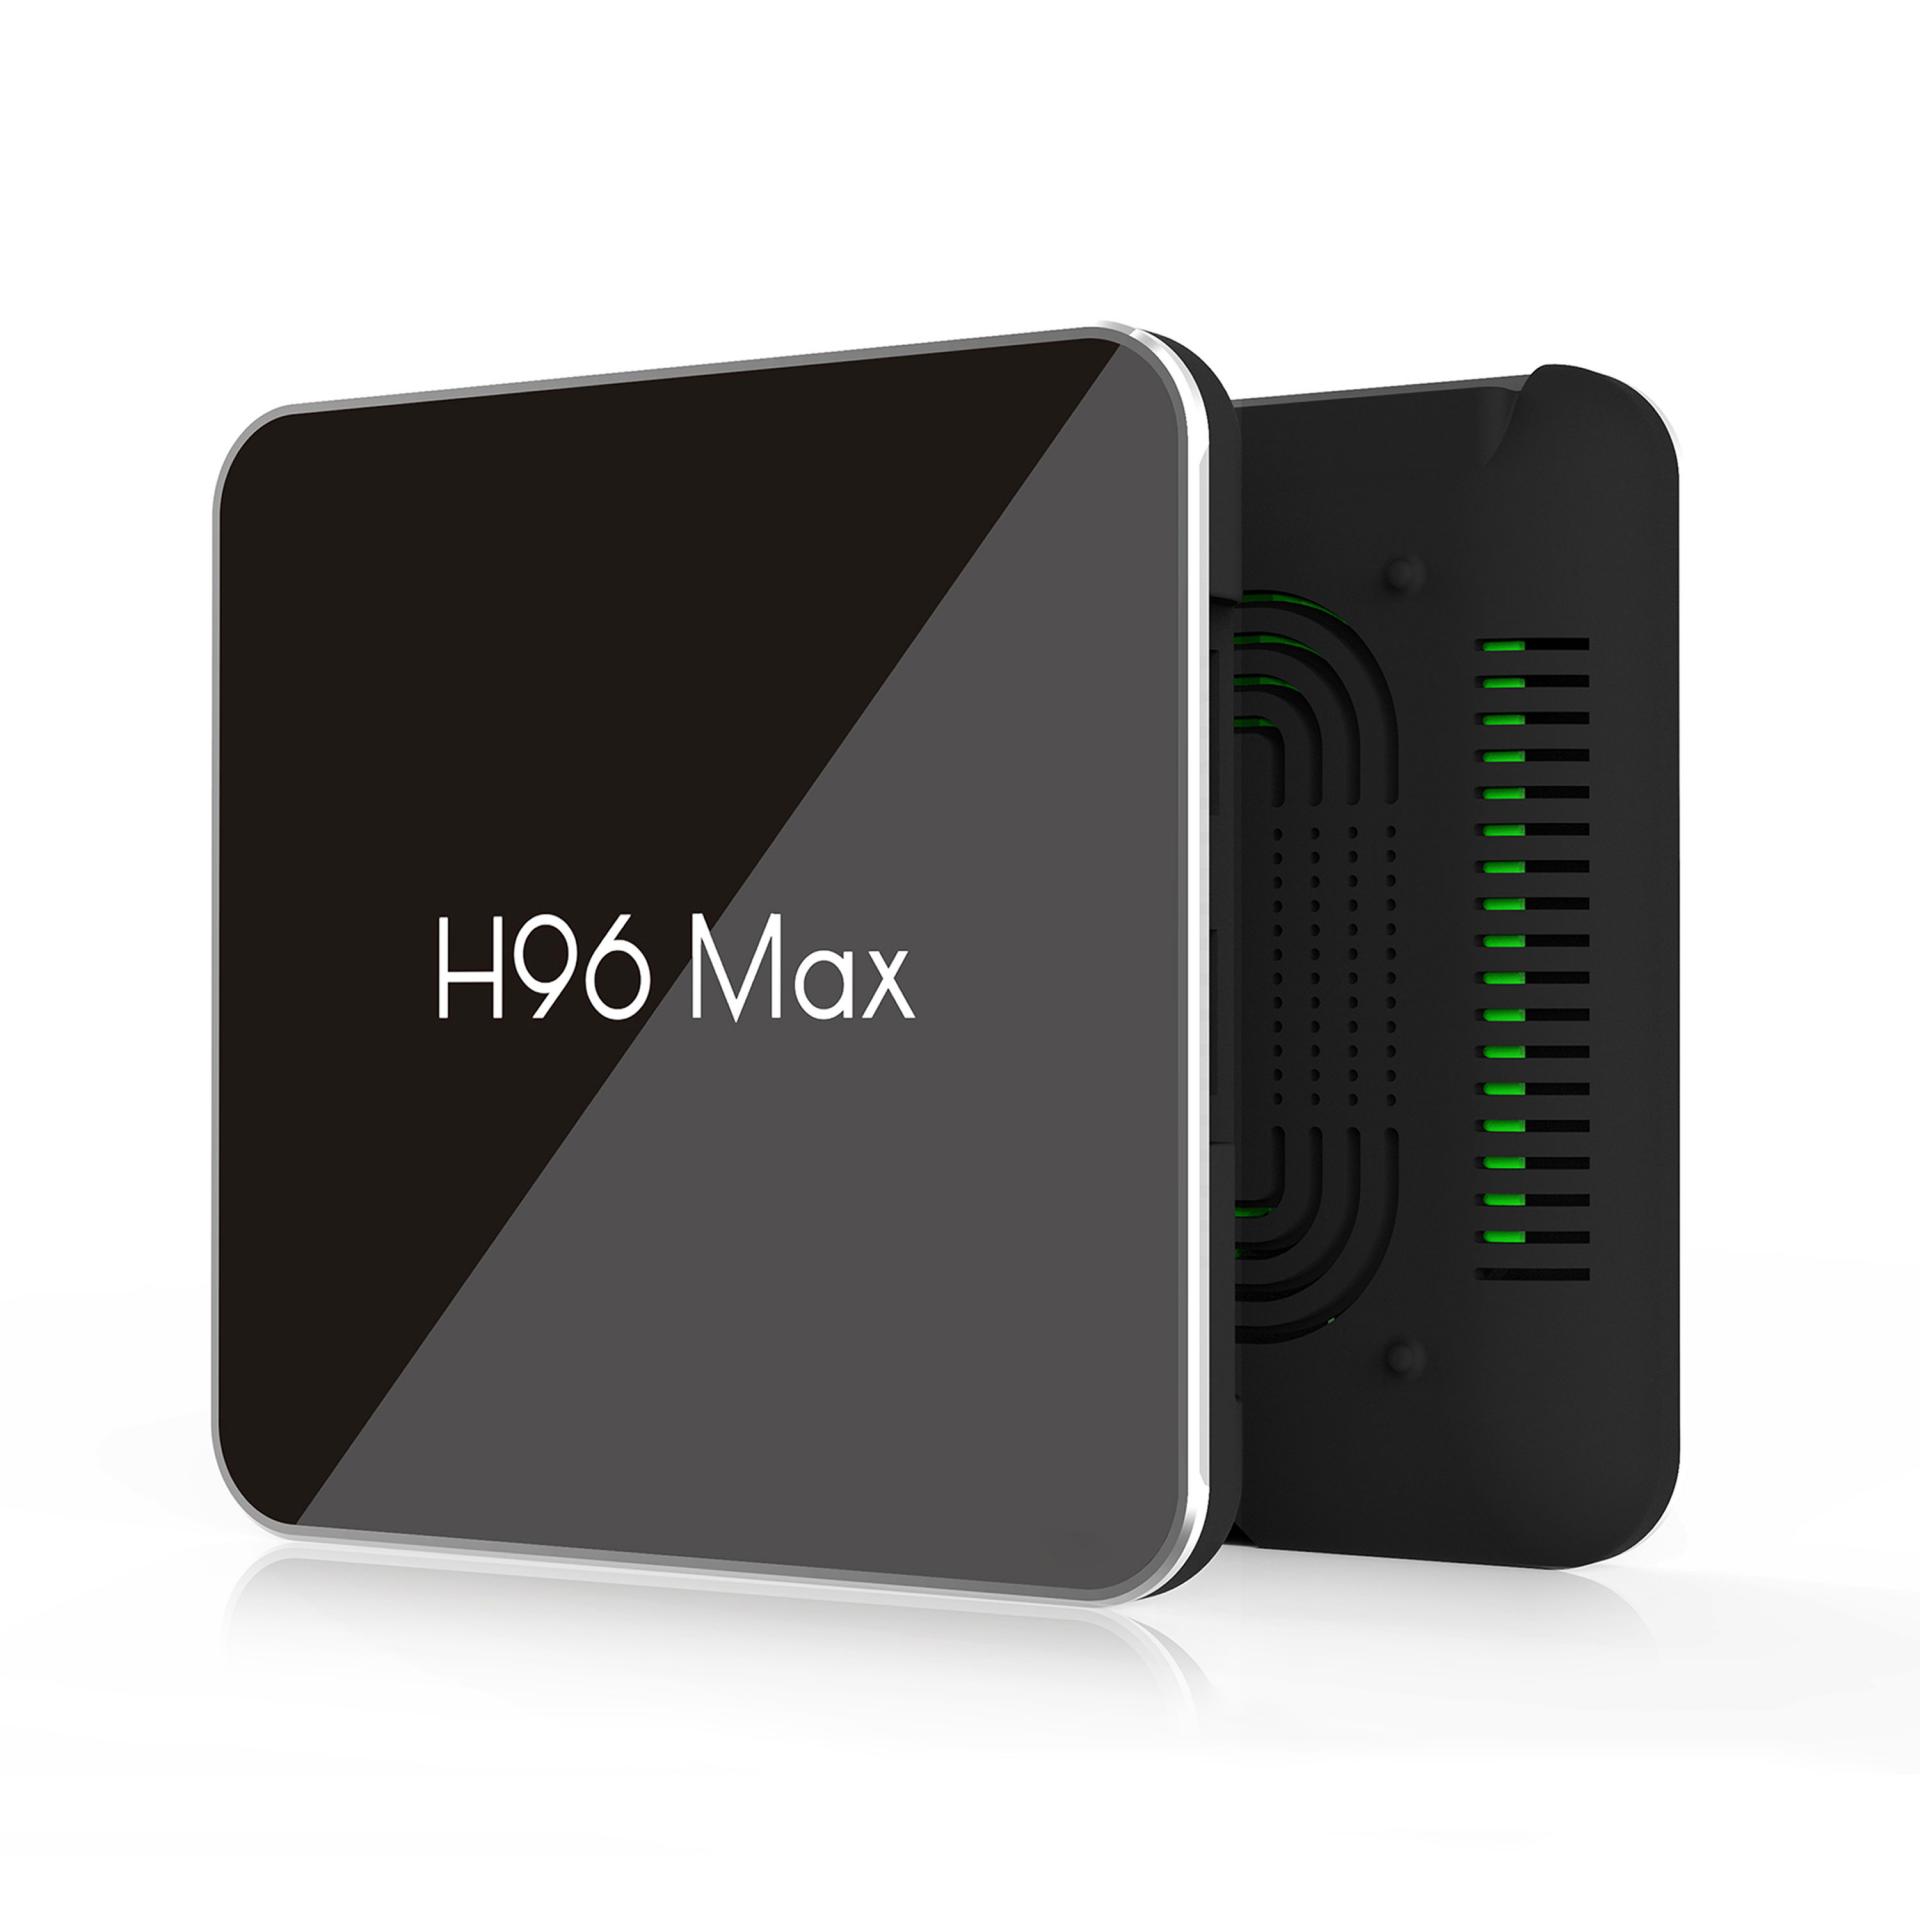 Set Top Box H96 Max X2 Amlogic S905X2 Android 9.0 TV Box 4GB for Home